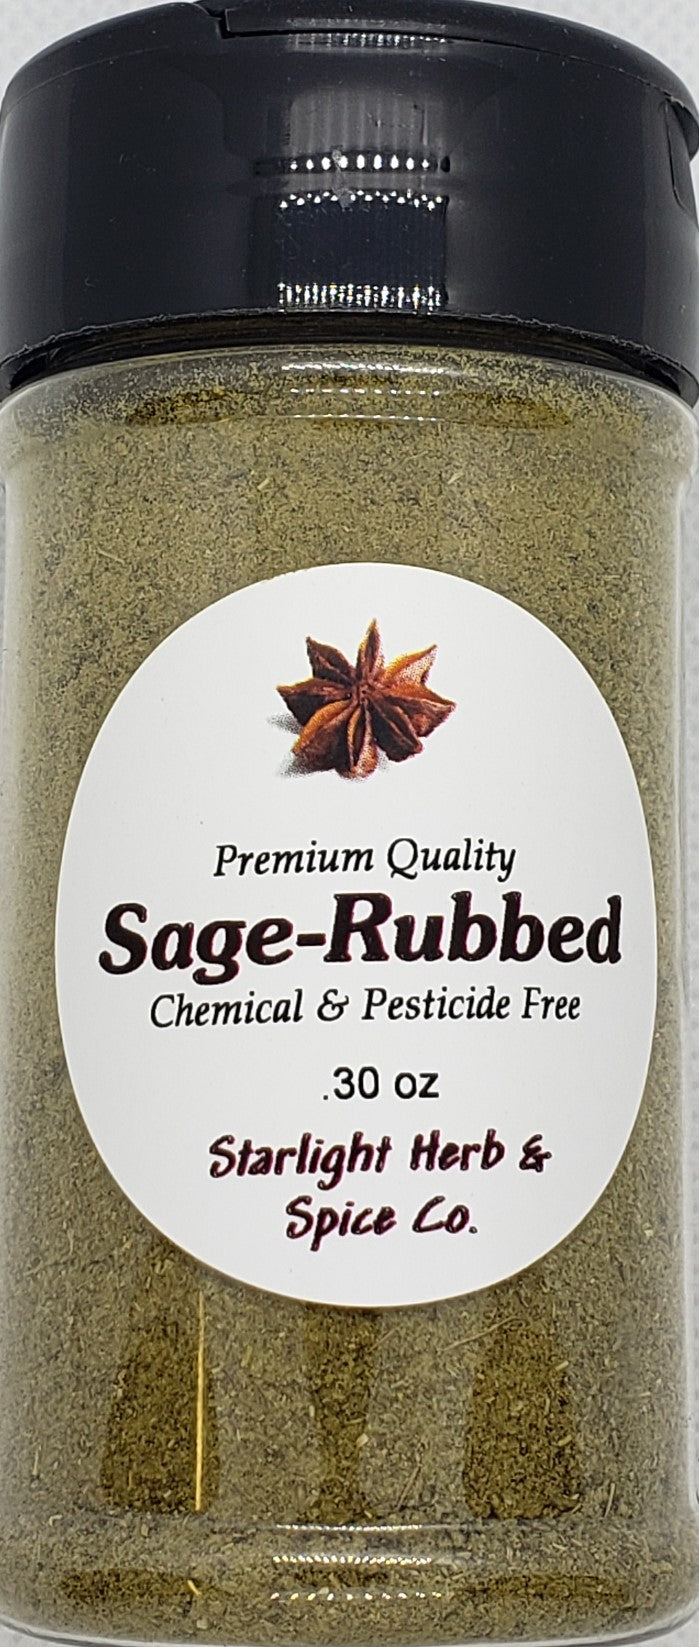 Rubbed Sage: used extensively with pork & poultry – Starlight Herb